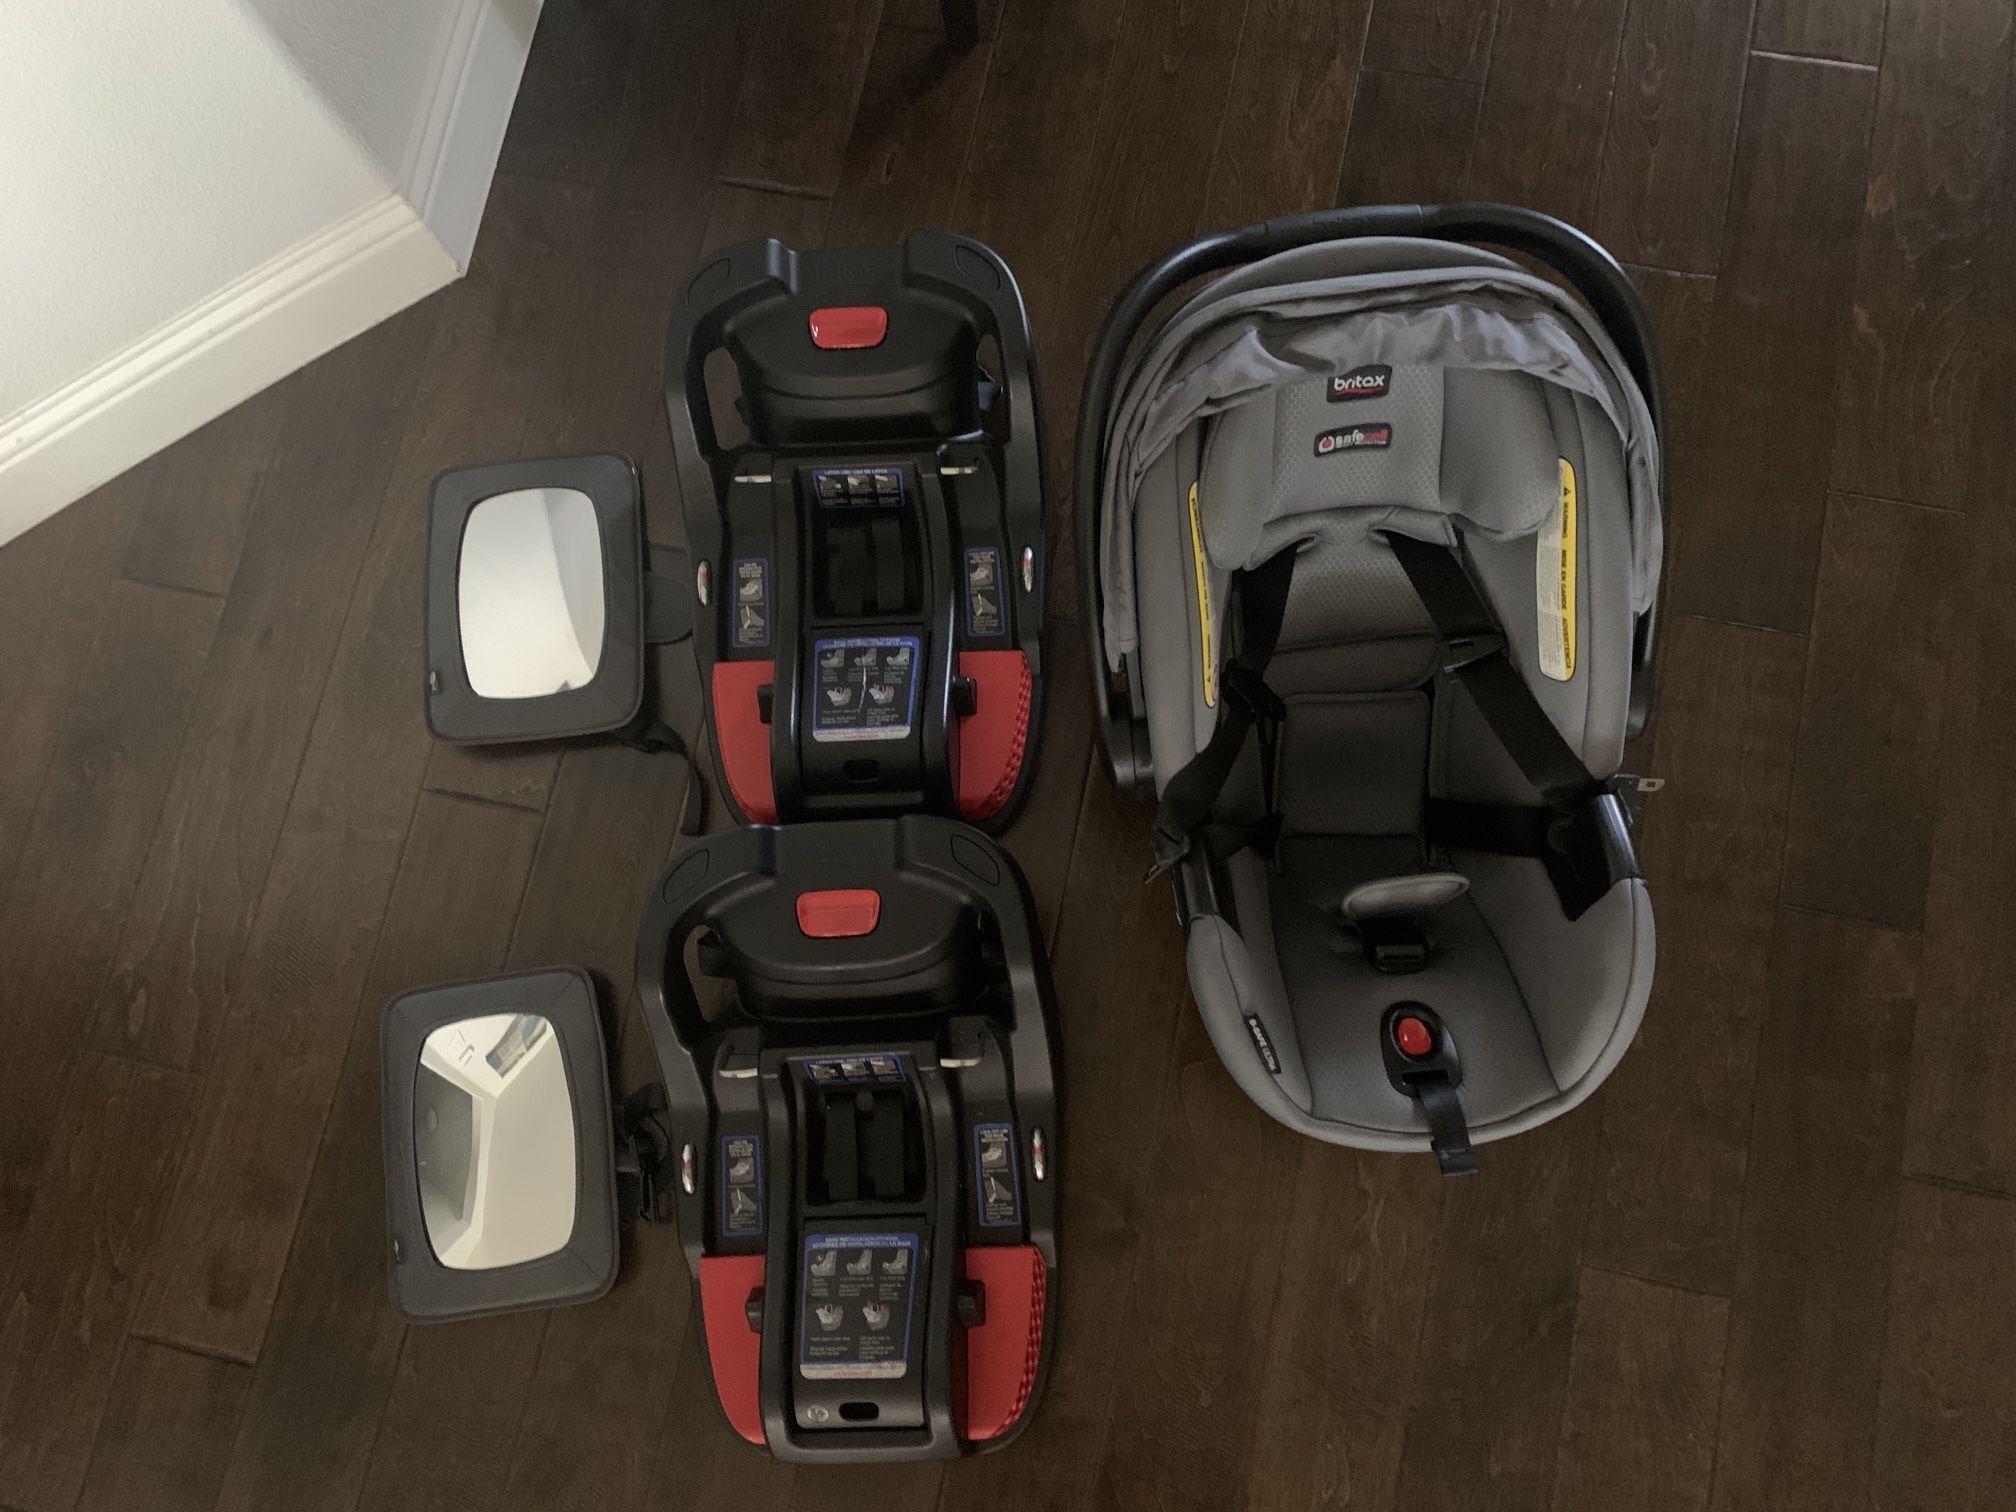 Britax Infant Car Seat With 2 Bases